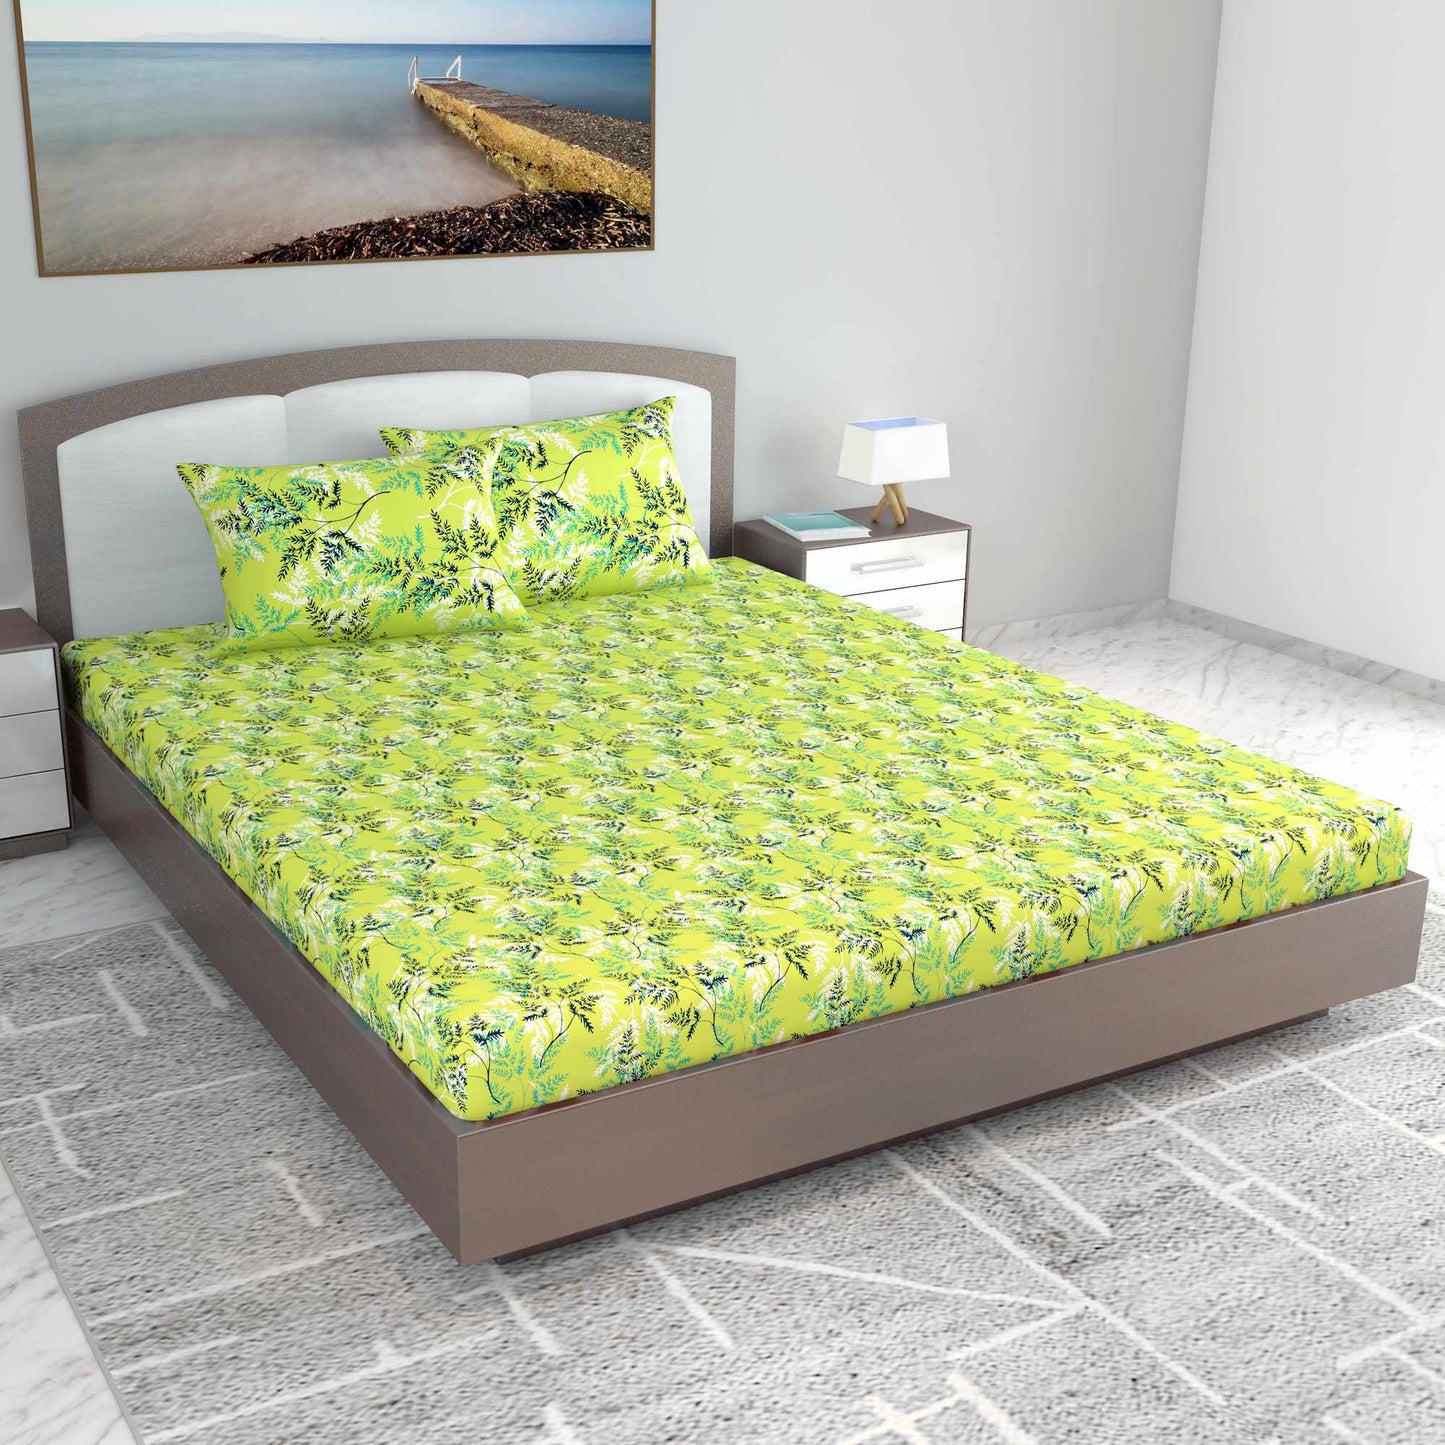 Lady Fern Floral Lime Green Bedsheet for King Size Bed - 100% Cotton